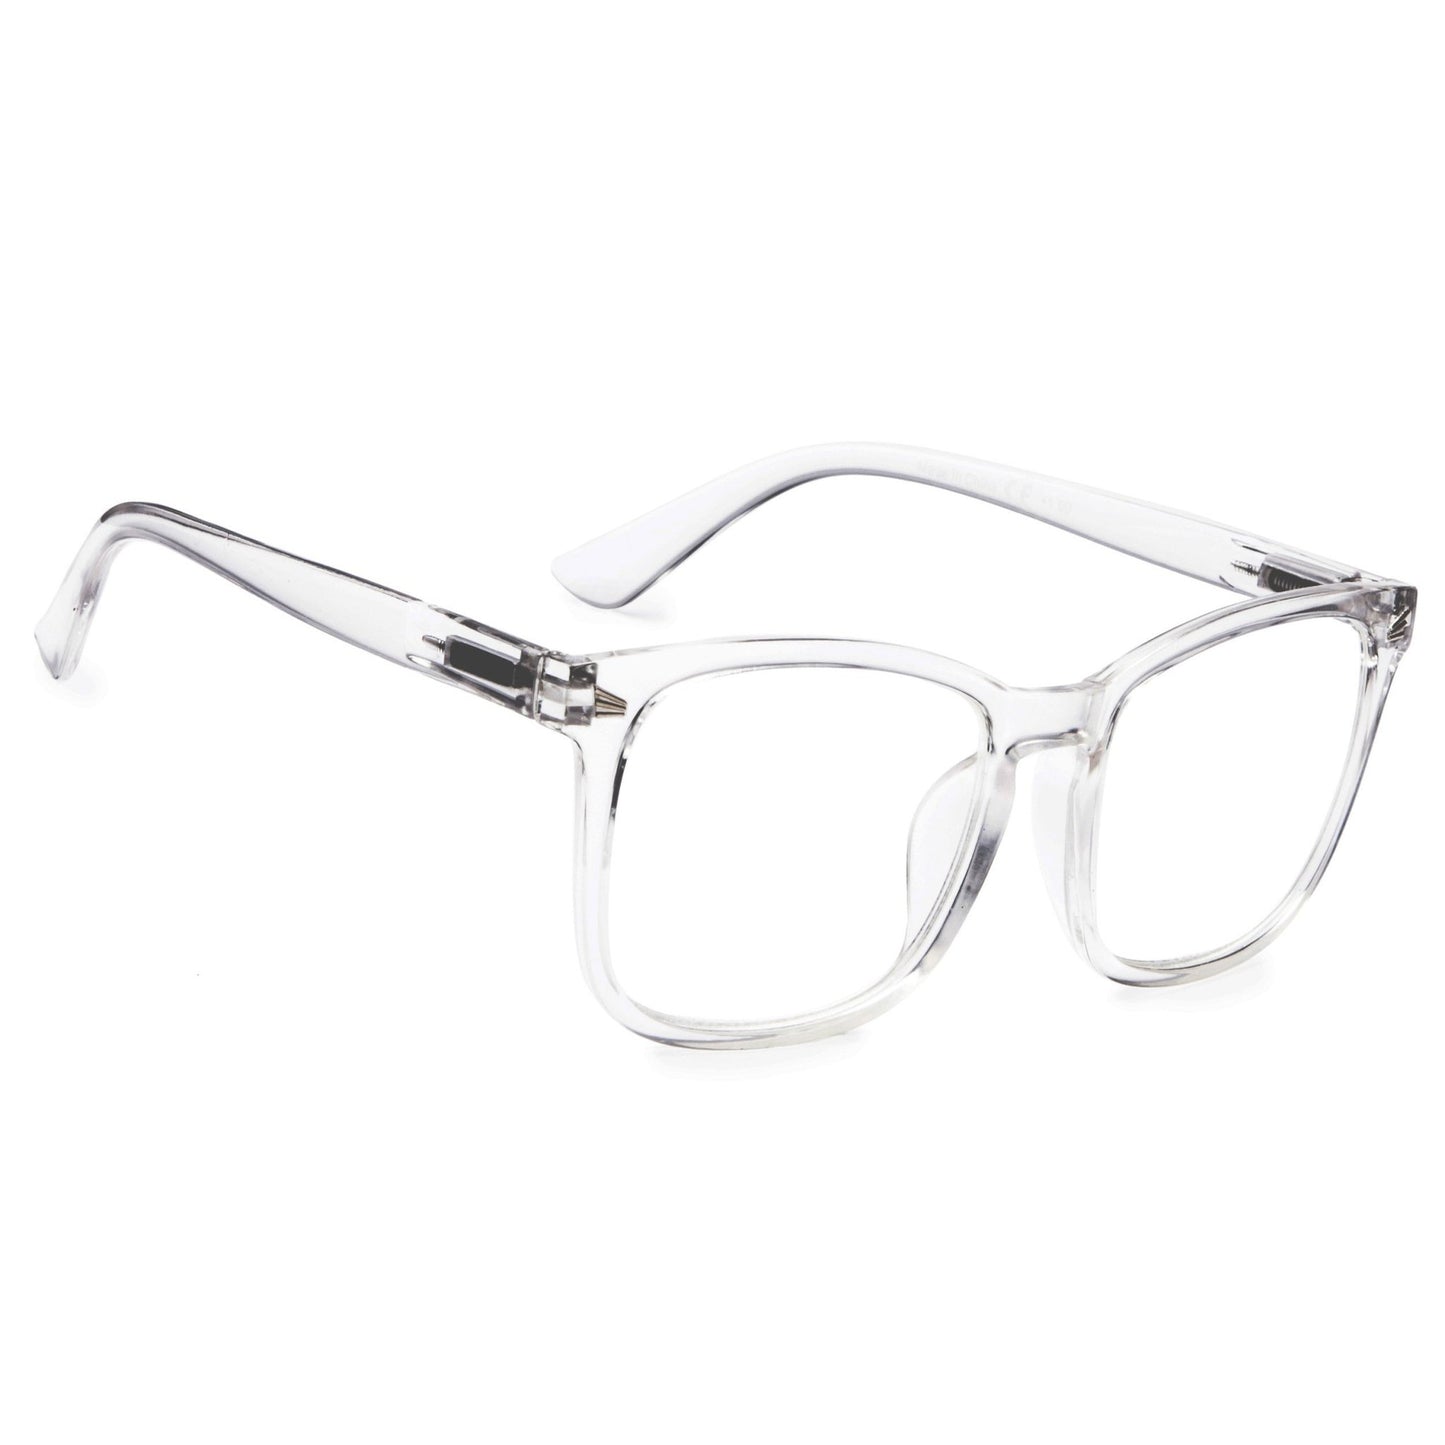 Fashion Reading Glasses Women Clear 5-RT1801